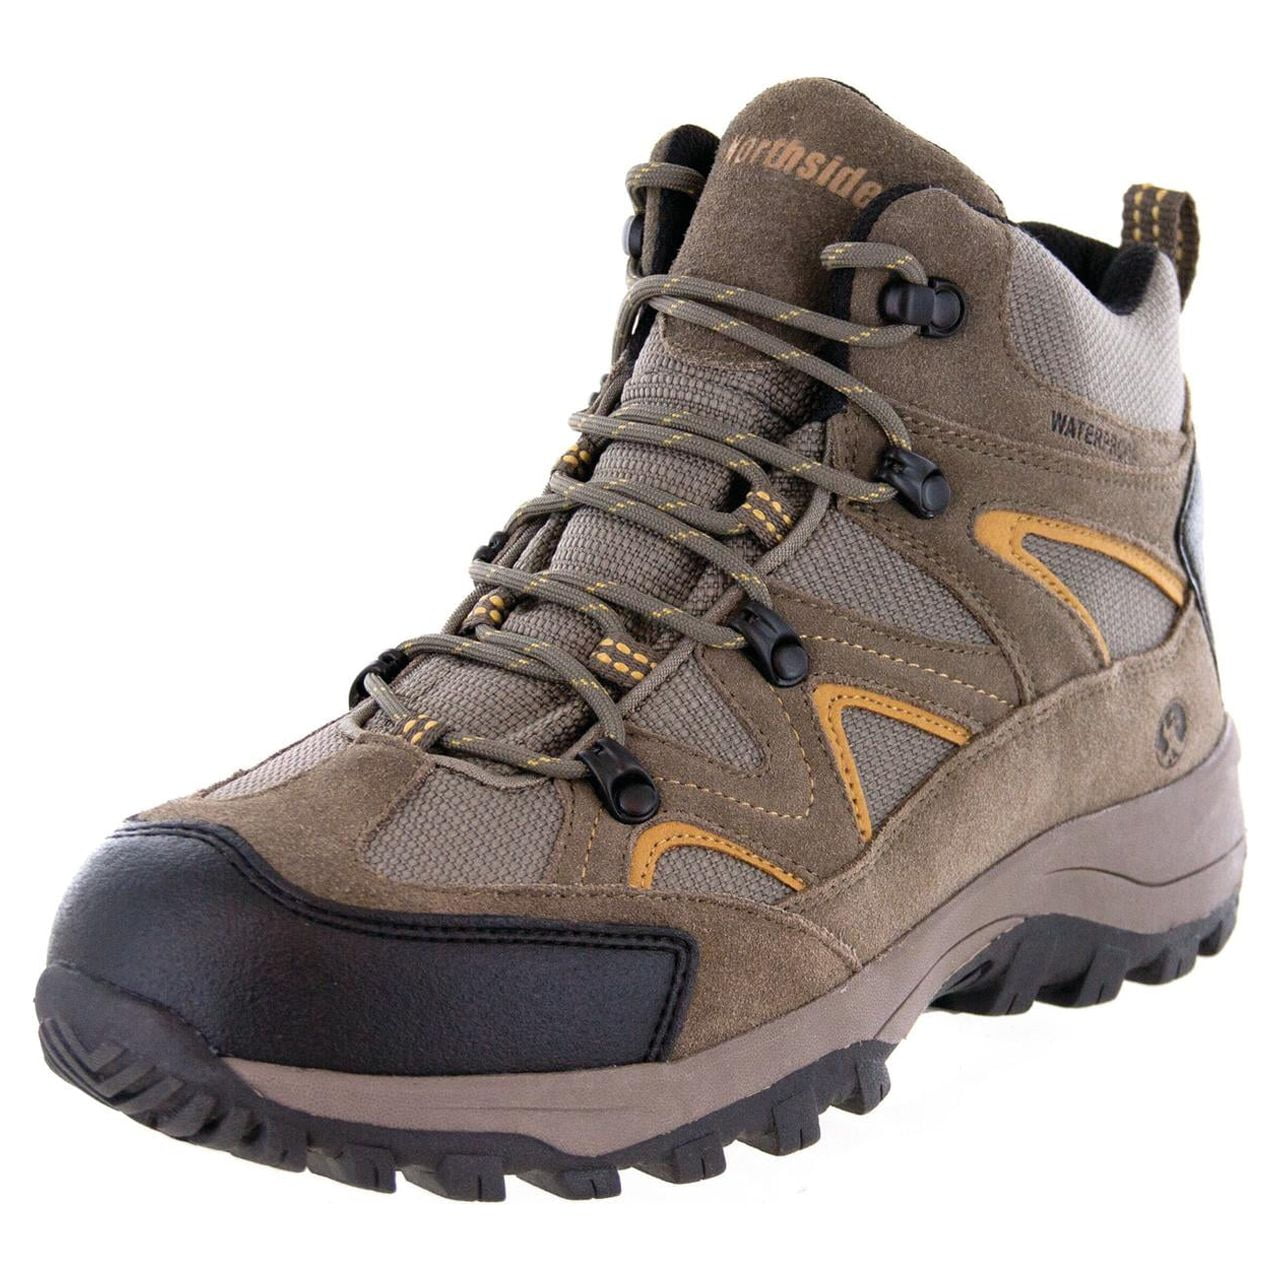 Northside Men's Snohomish Mid Waterproof Hiking Boot (Wide Available ...